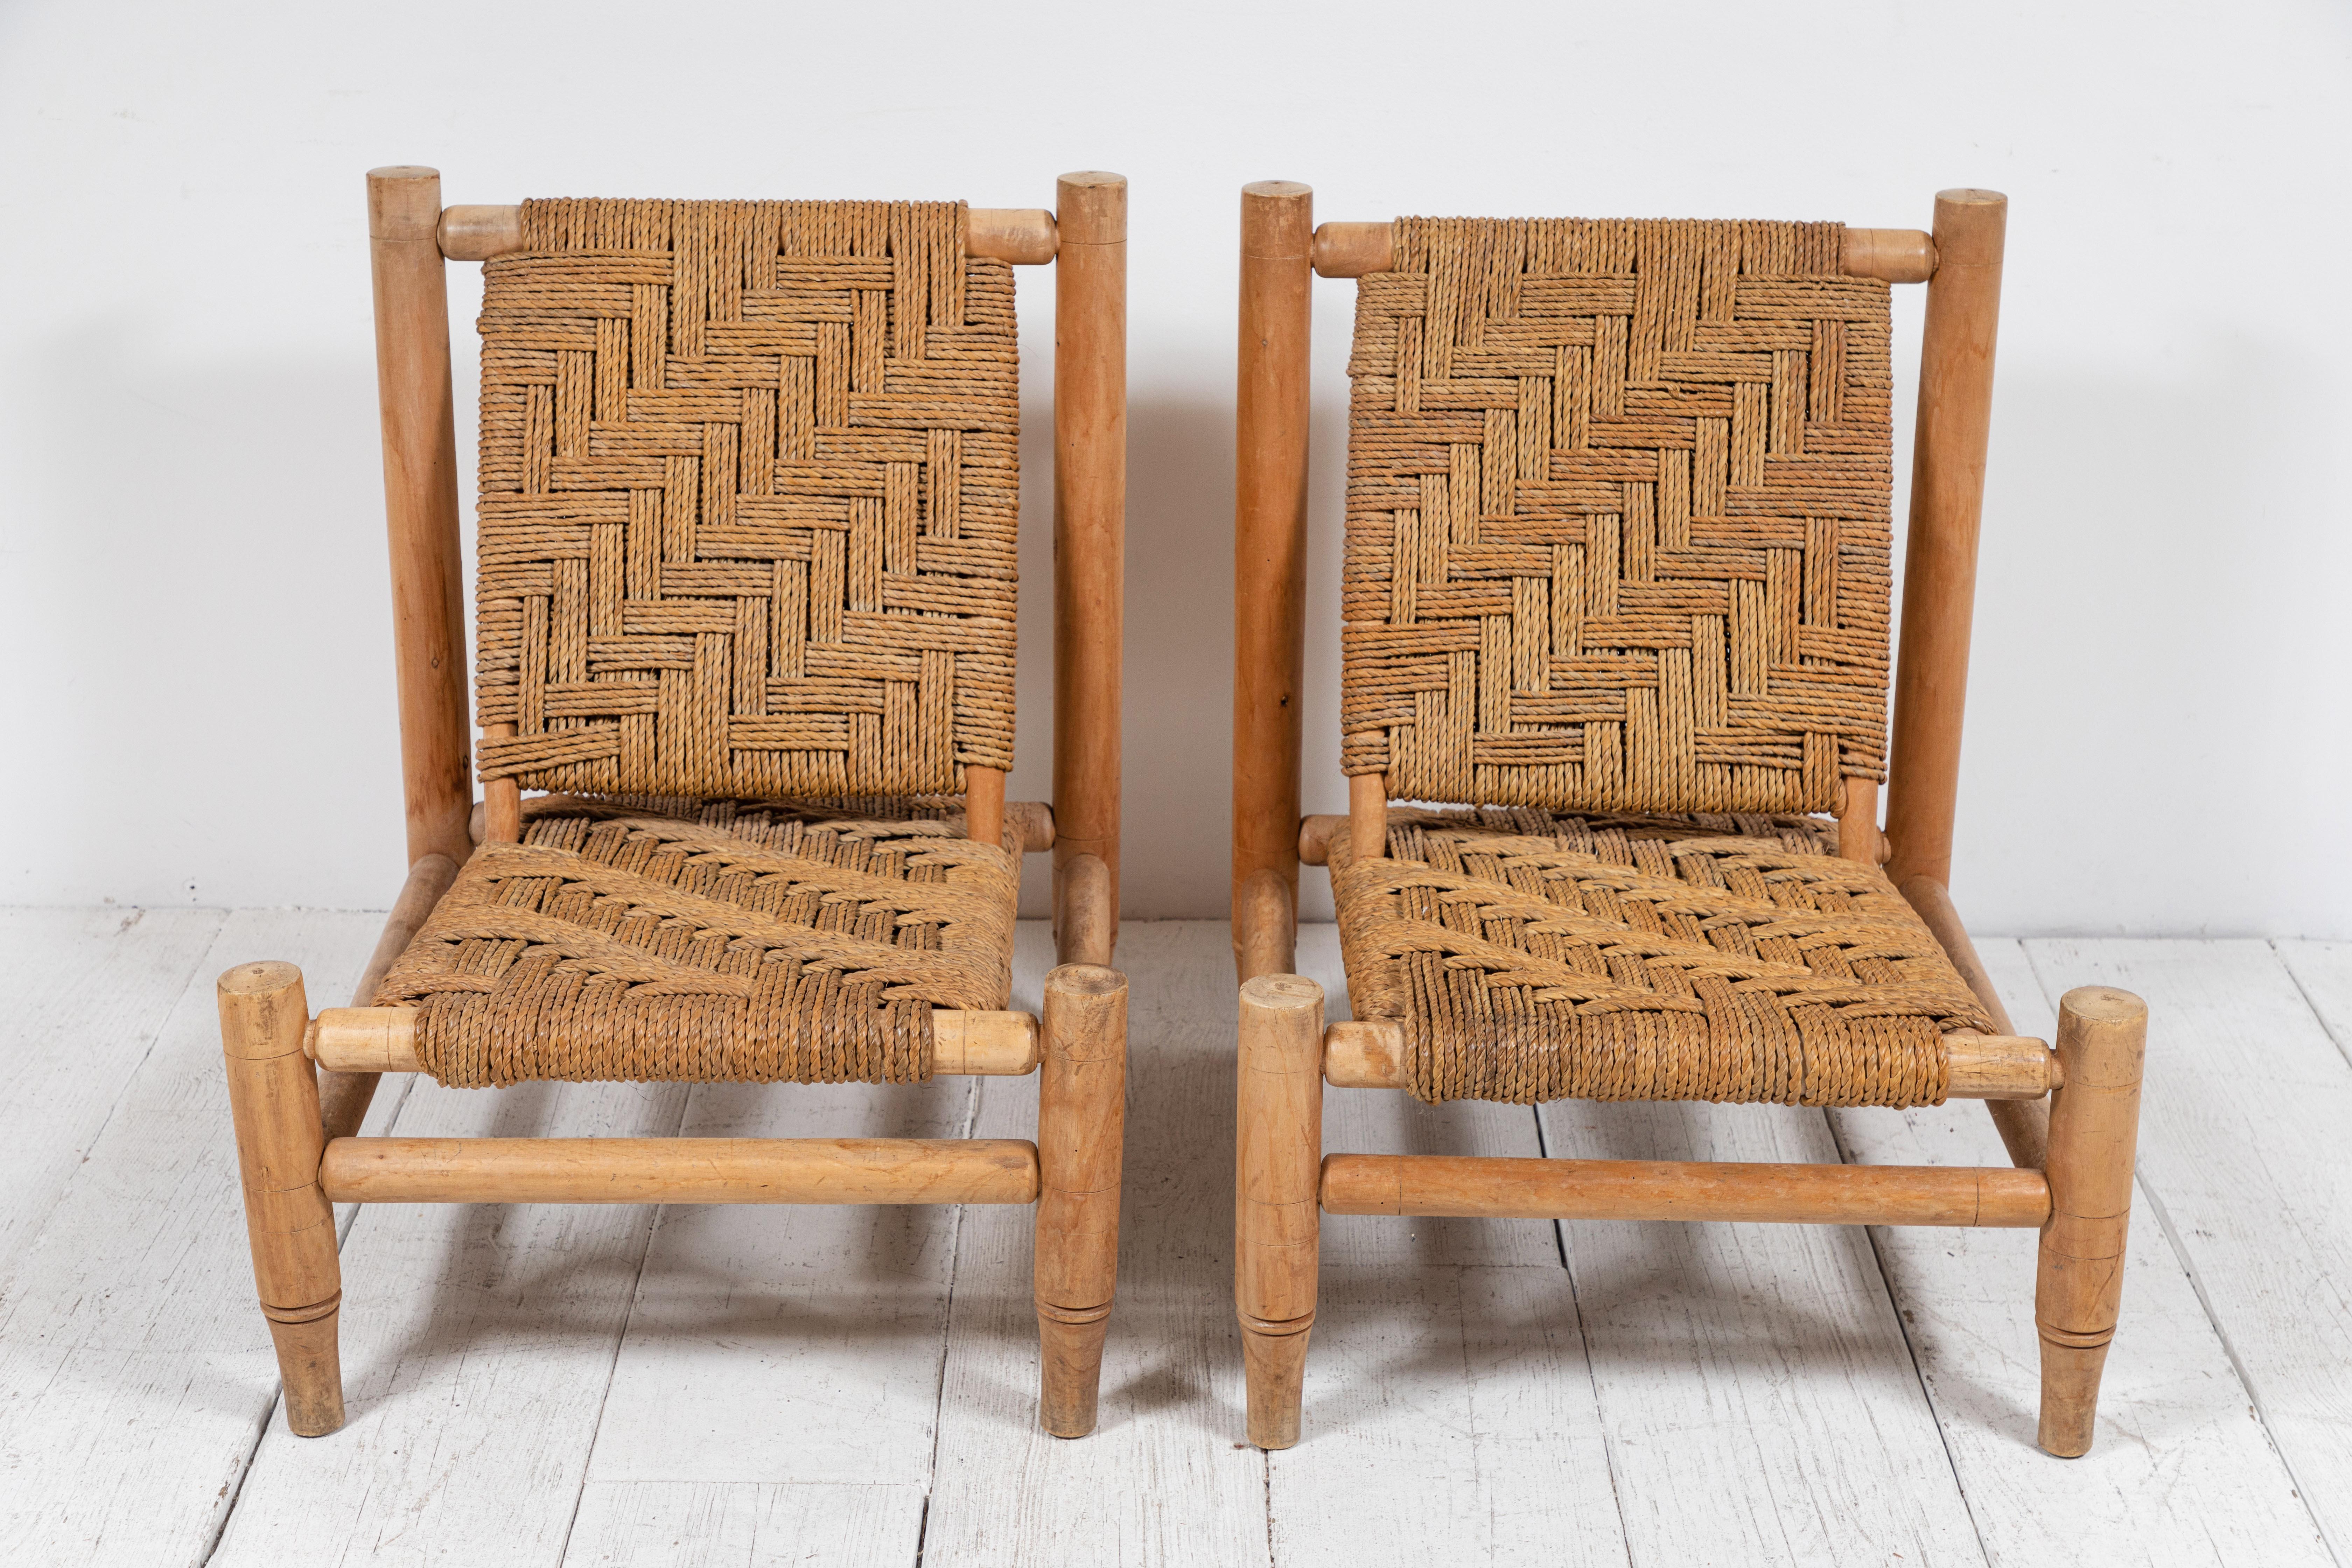 Beautiful pair of French wood and rope chairs by Adrien Audoux & Frida Minet. The chairs offer a unique basket weave pattern. The rope is in great condition.